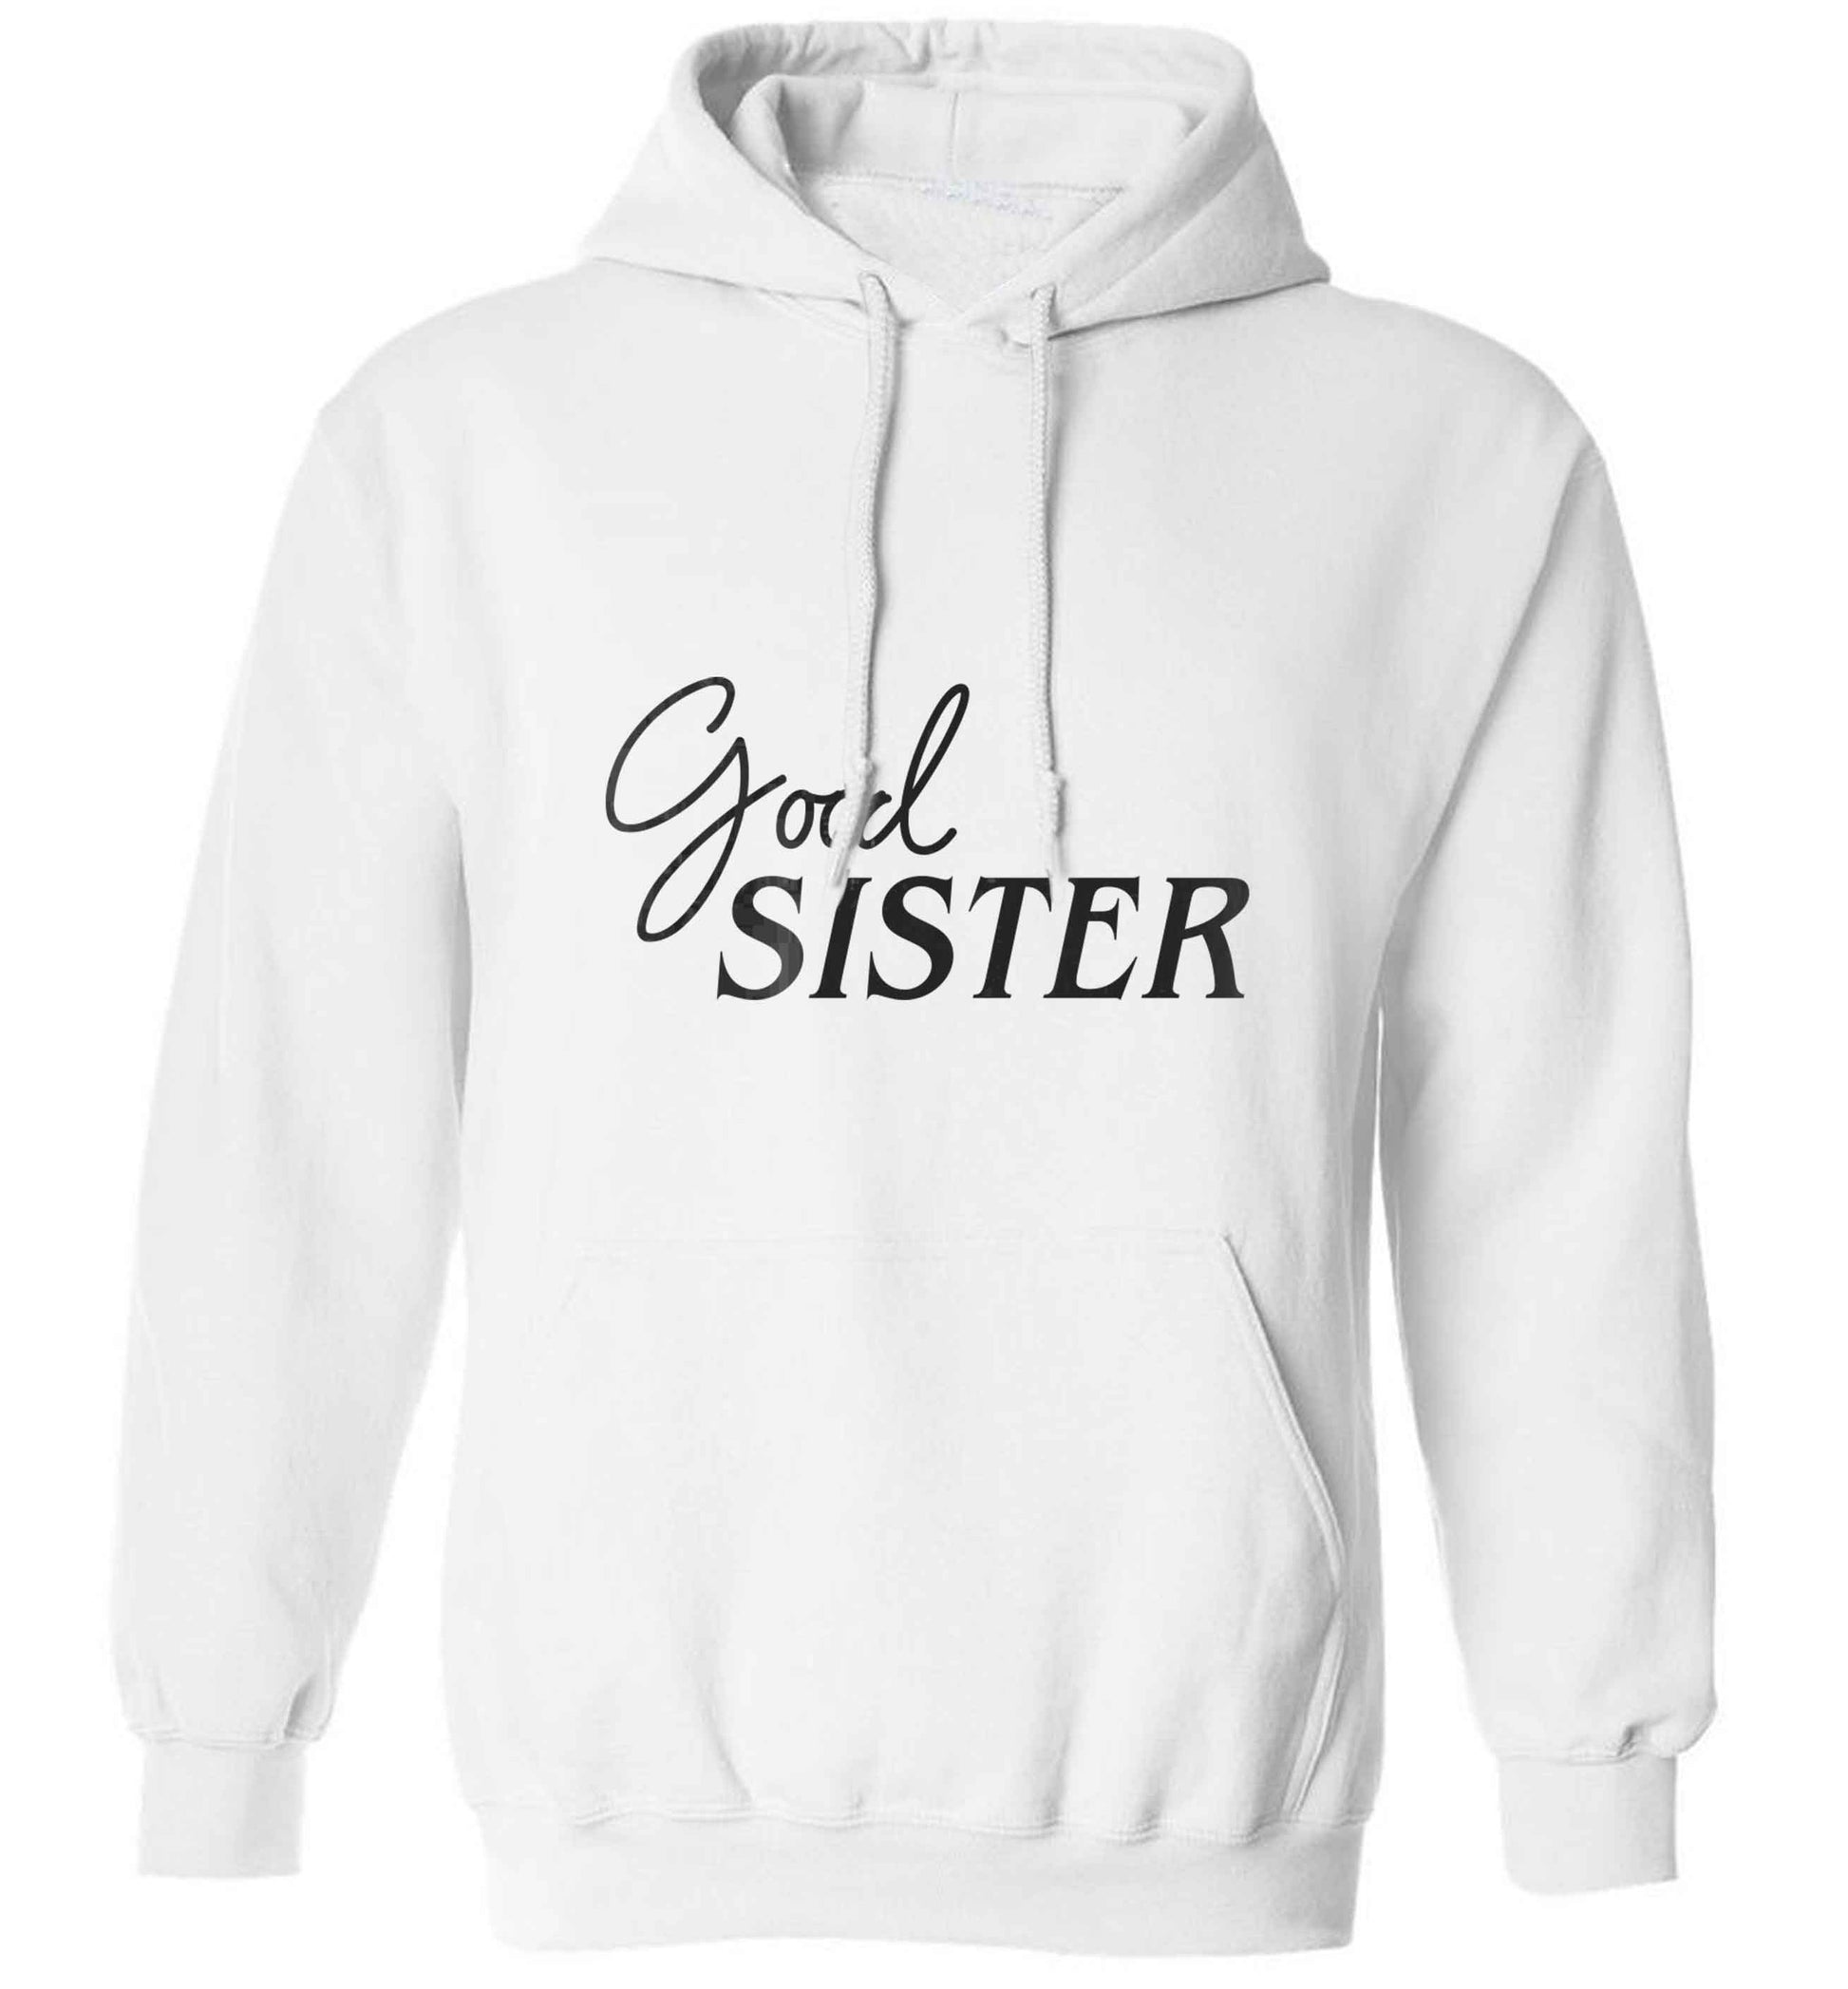 Good sister adults unisex white hoodie 2XL